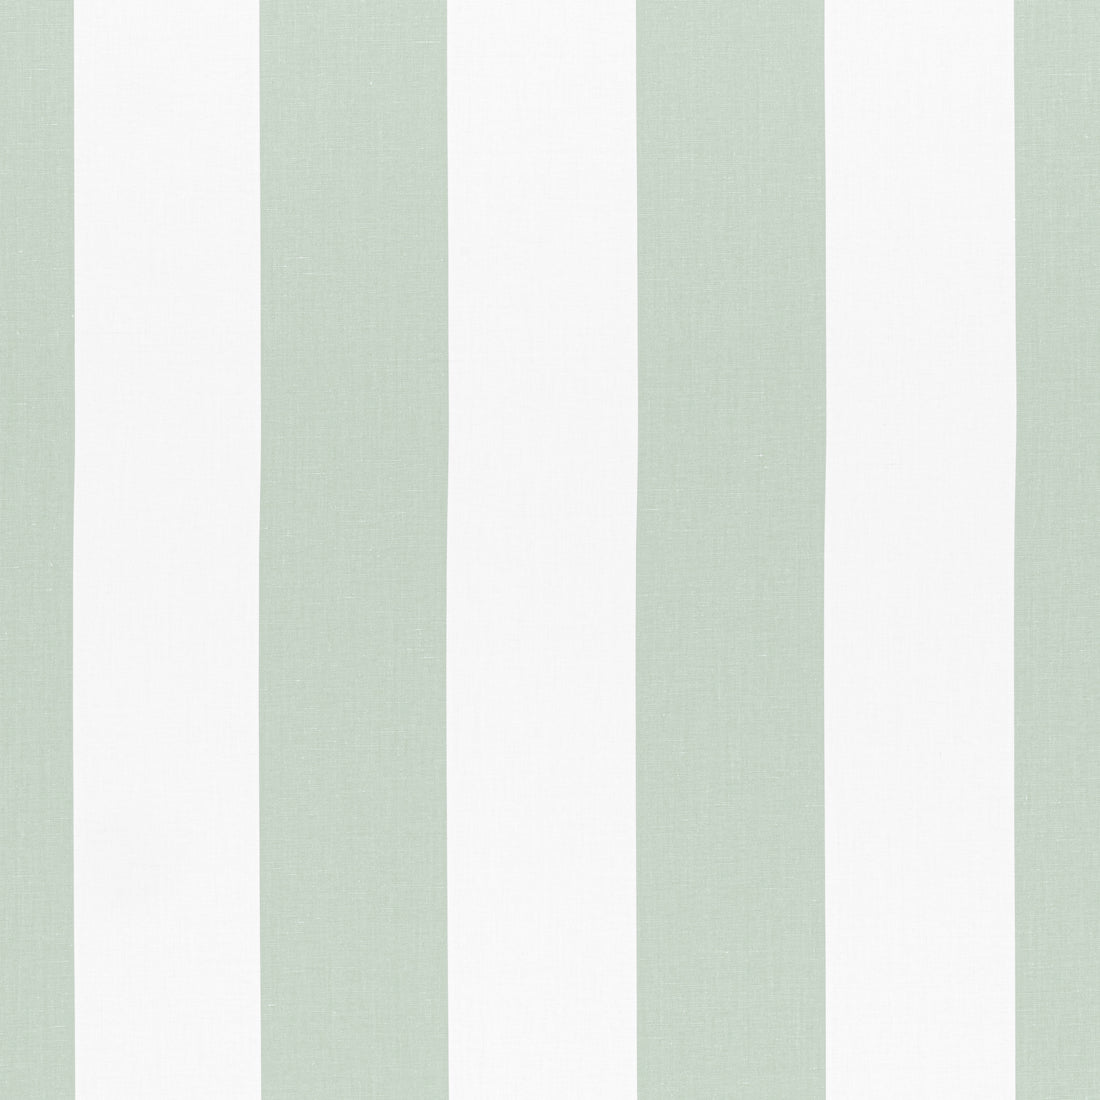 Bergamo Stripe fabric in mist - pattern number W713634 - by Thibaut in the Grand Palace collection